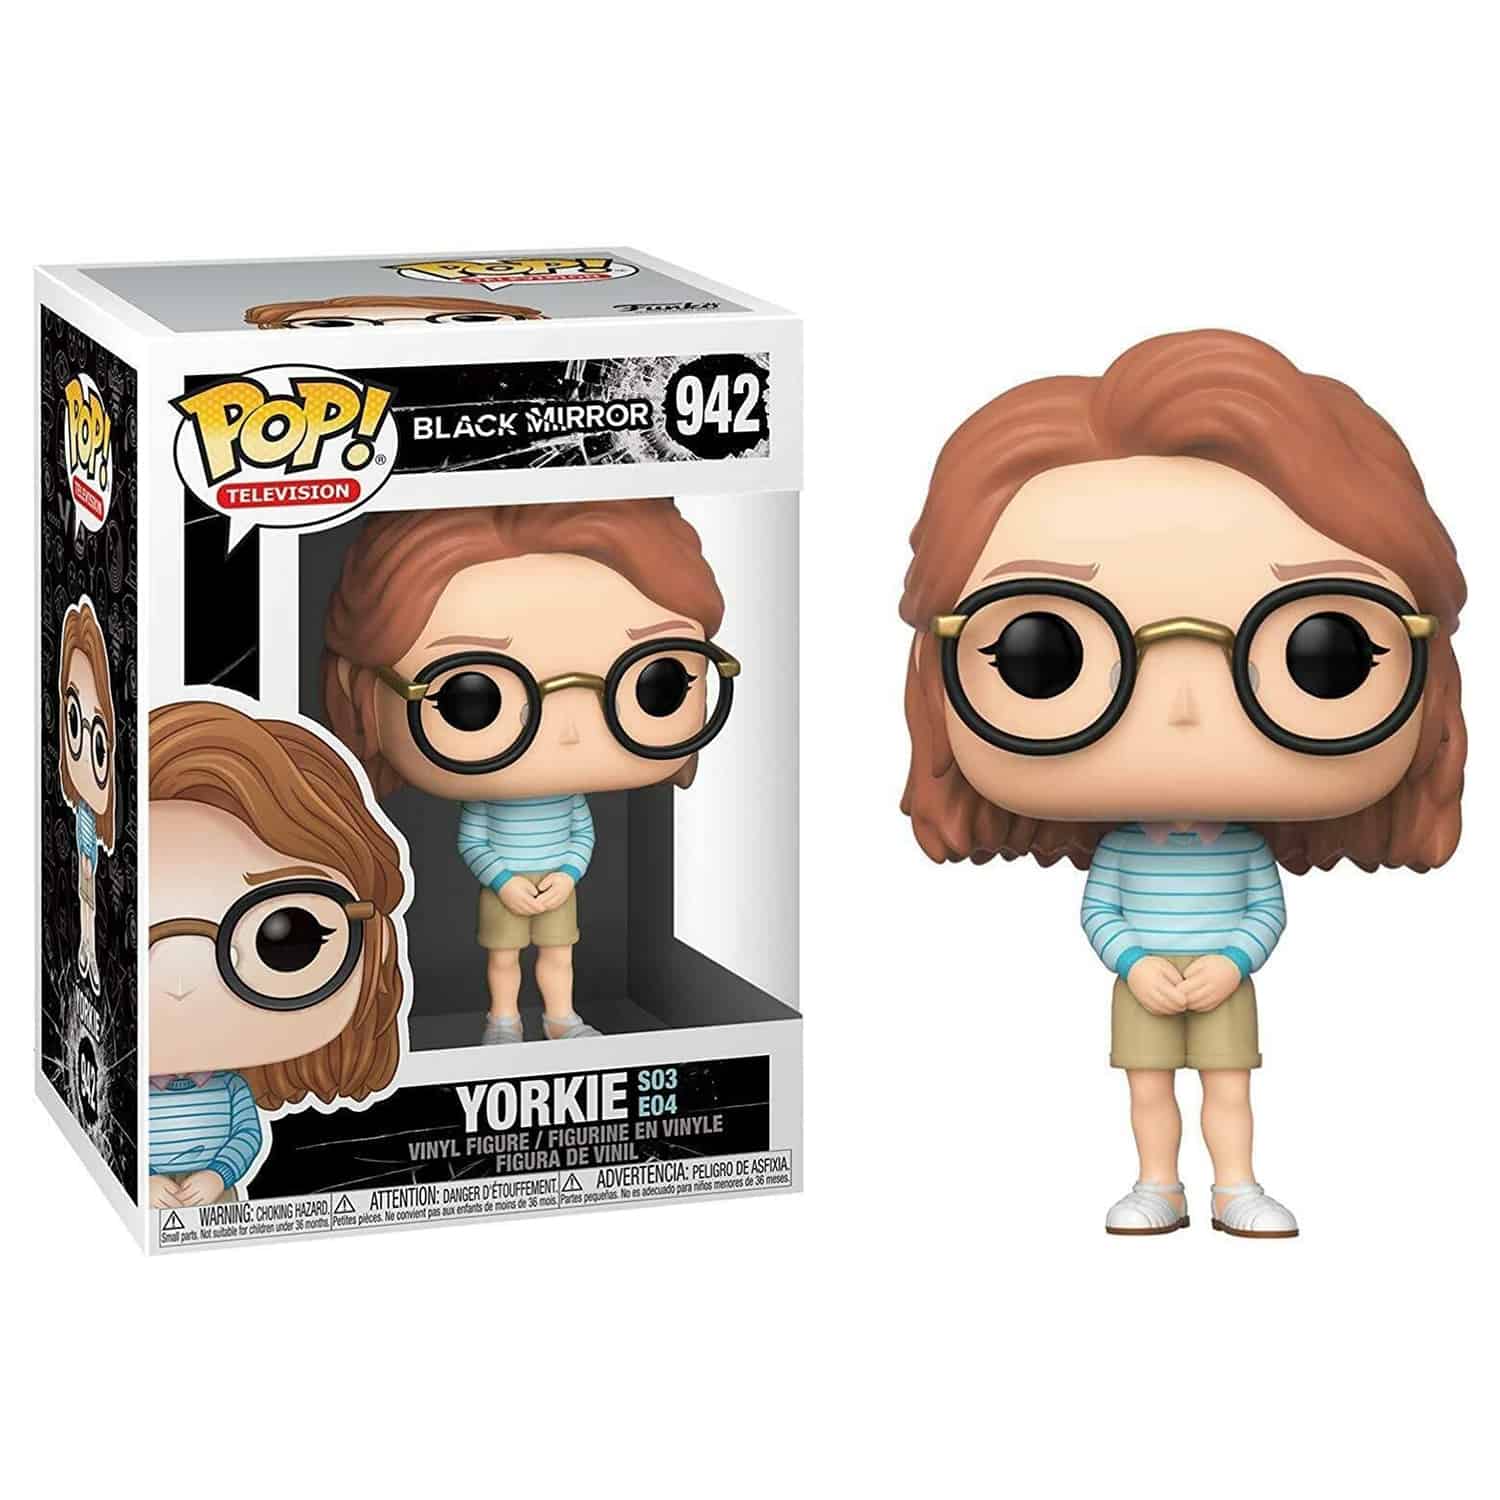 Nanette and Kelly Inc a marvel 2 pack and 2 x Black Mirror Pops, Funko Funko Bundle 